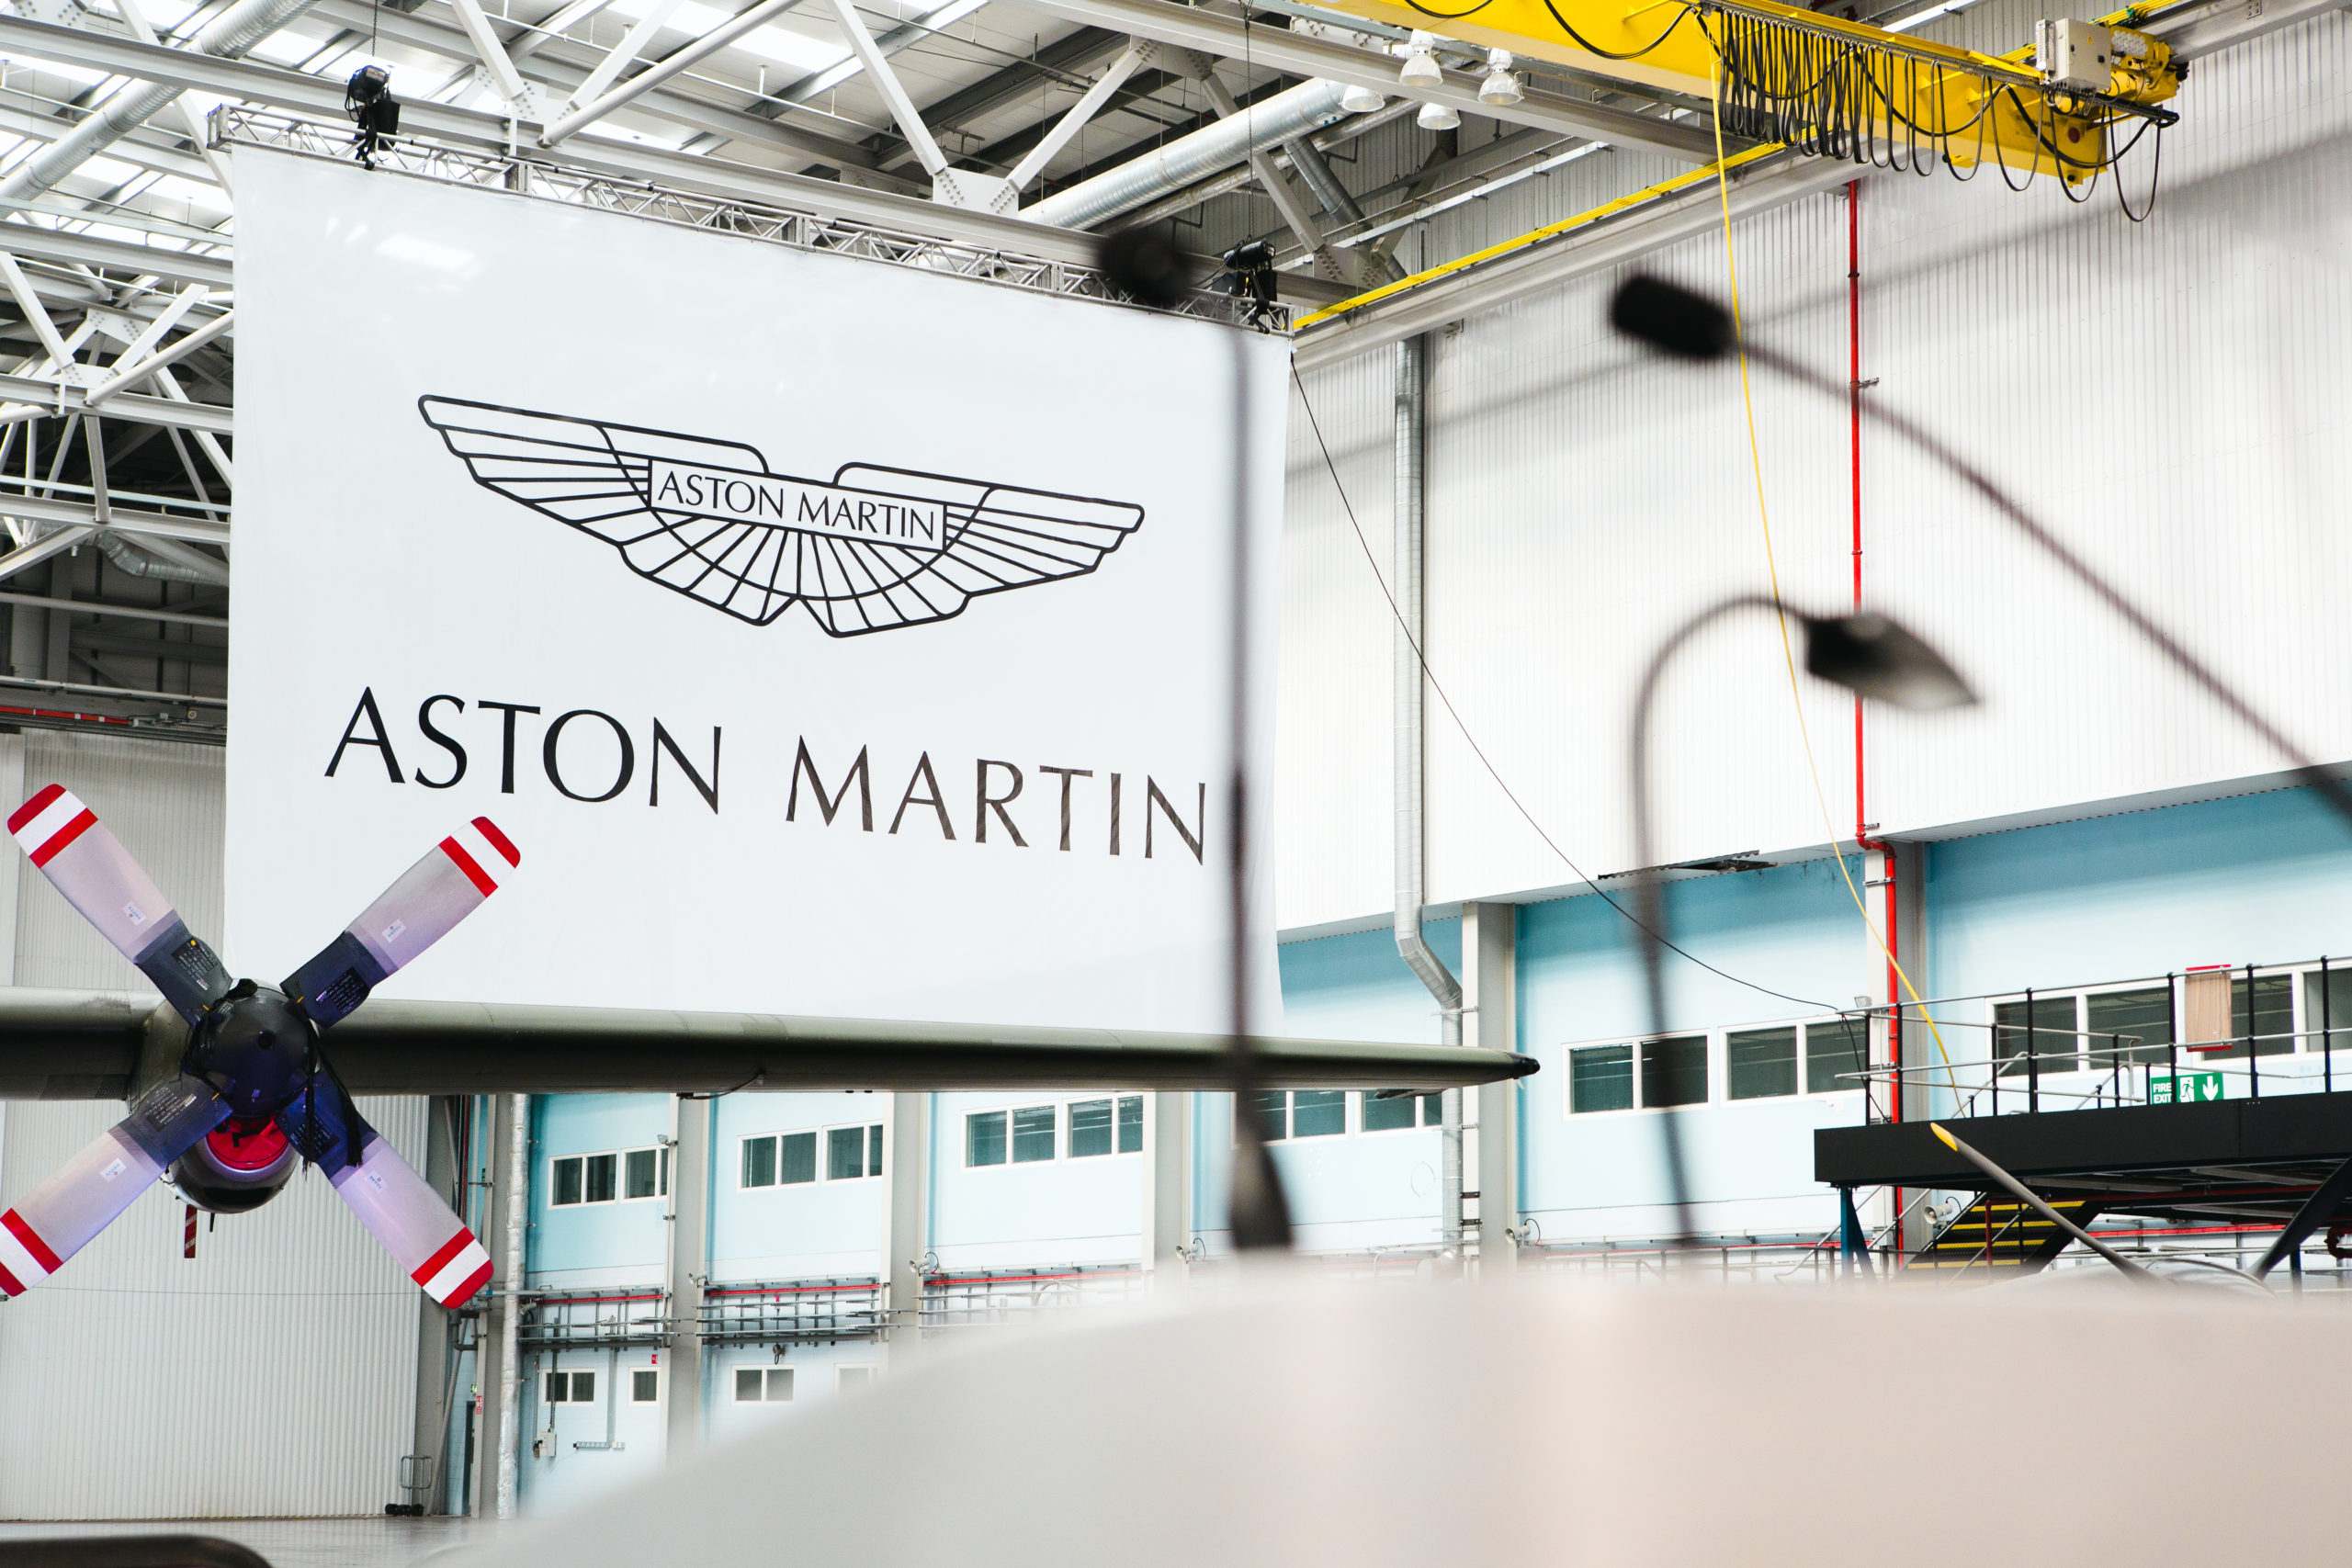 A view of a Aston Martin sign inside a hanger with a microphone out of focus and a wing of a plane in the background.